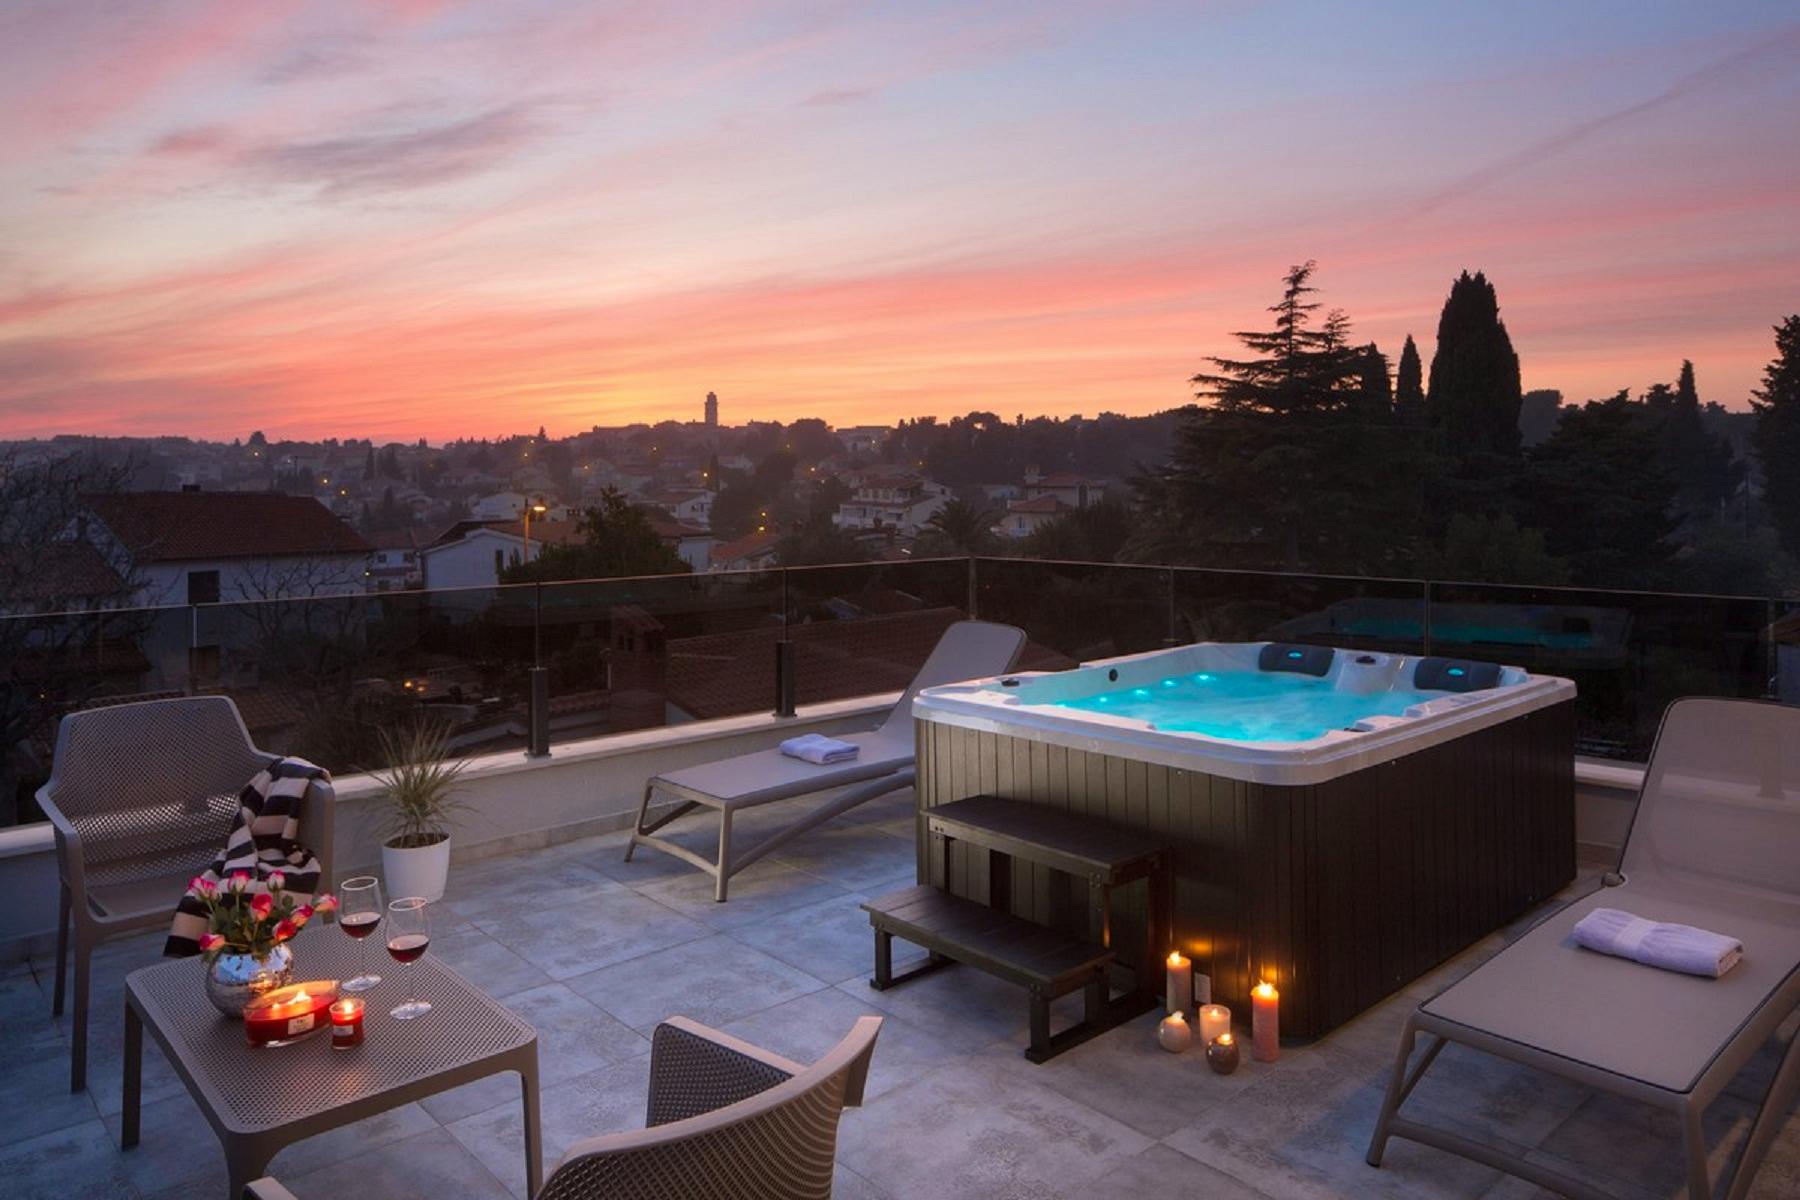 Jacuzzi on the terrace